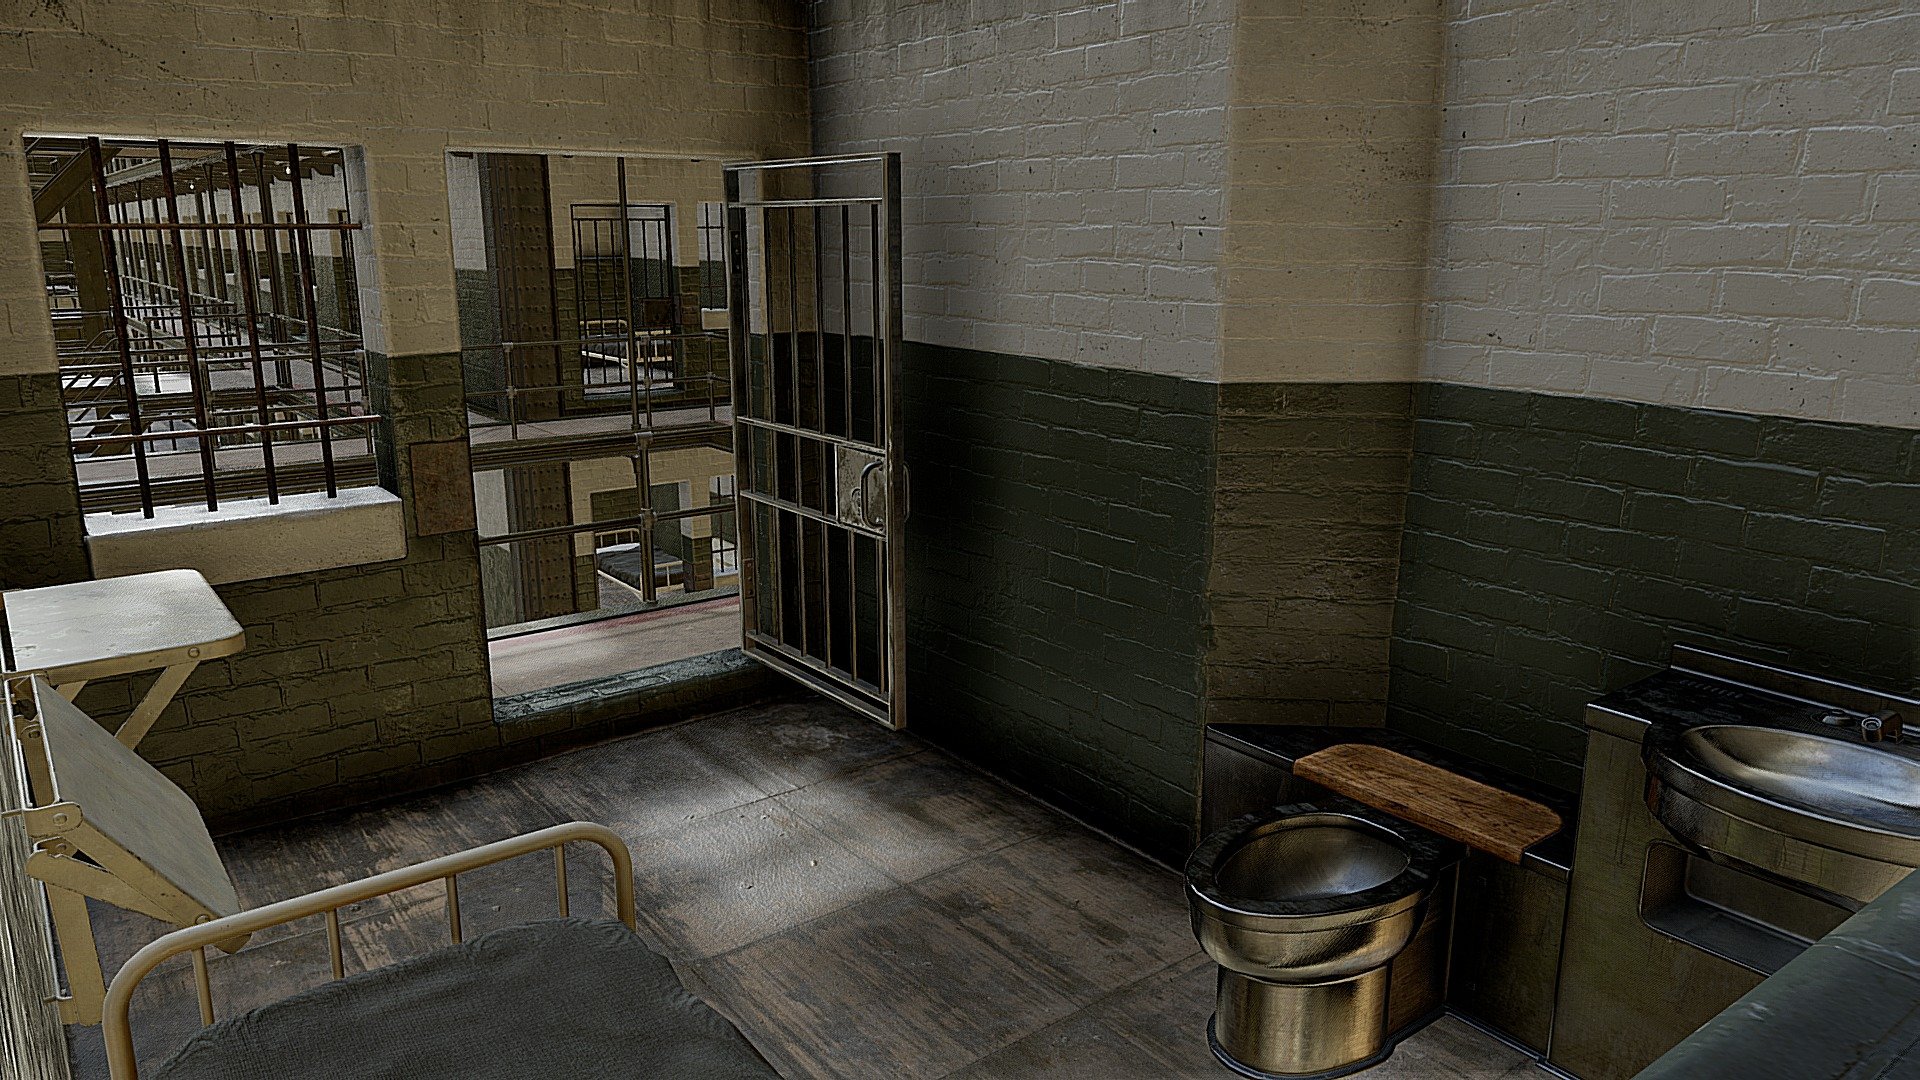 A large prison environment scene, lightly inspired by Shawshank State Prison.

PBR - Metallic Roughness 3d model